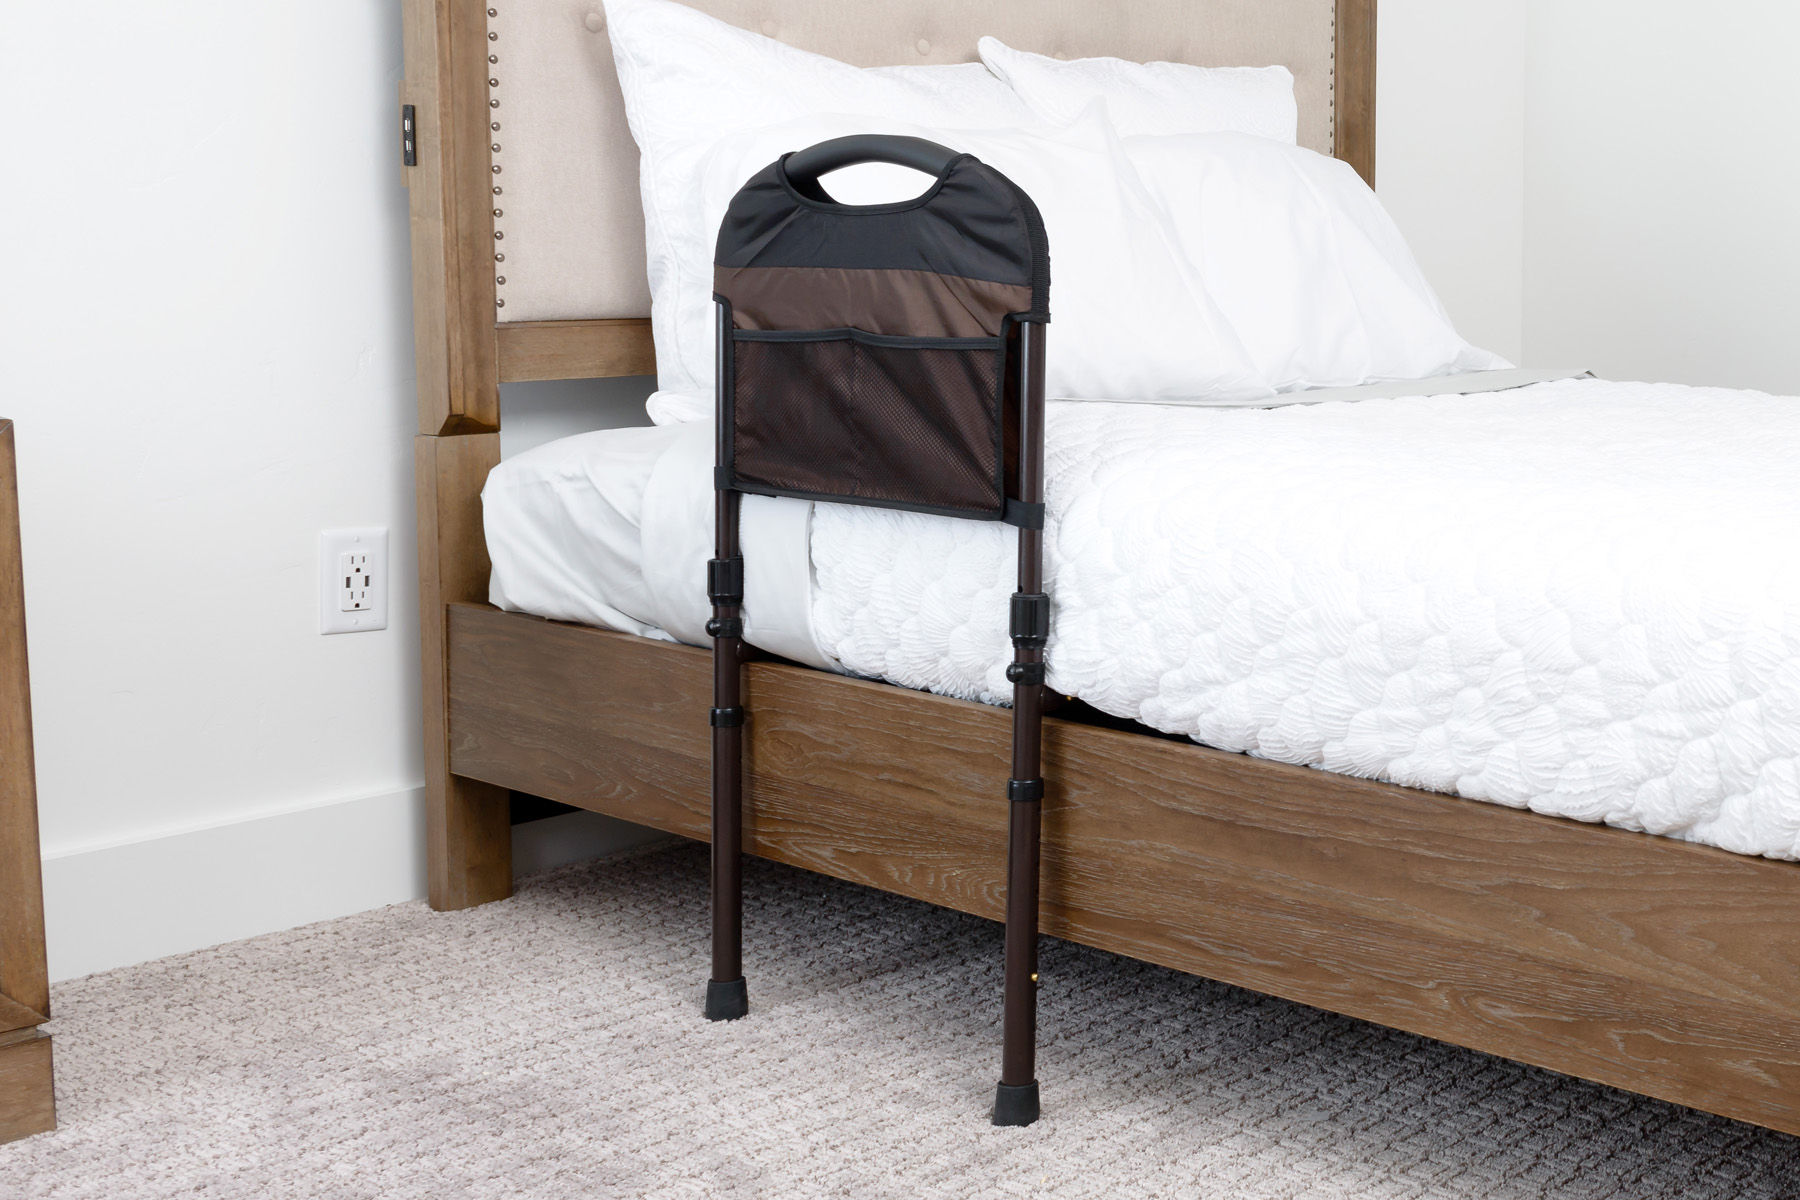 Stable Rail - Bedside Support Handle for Seniors